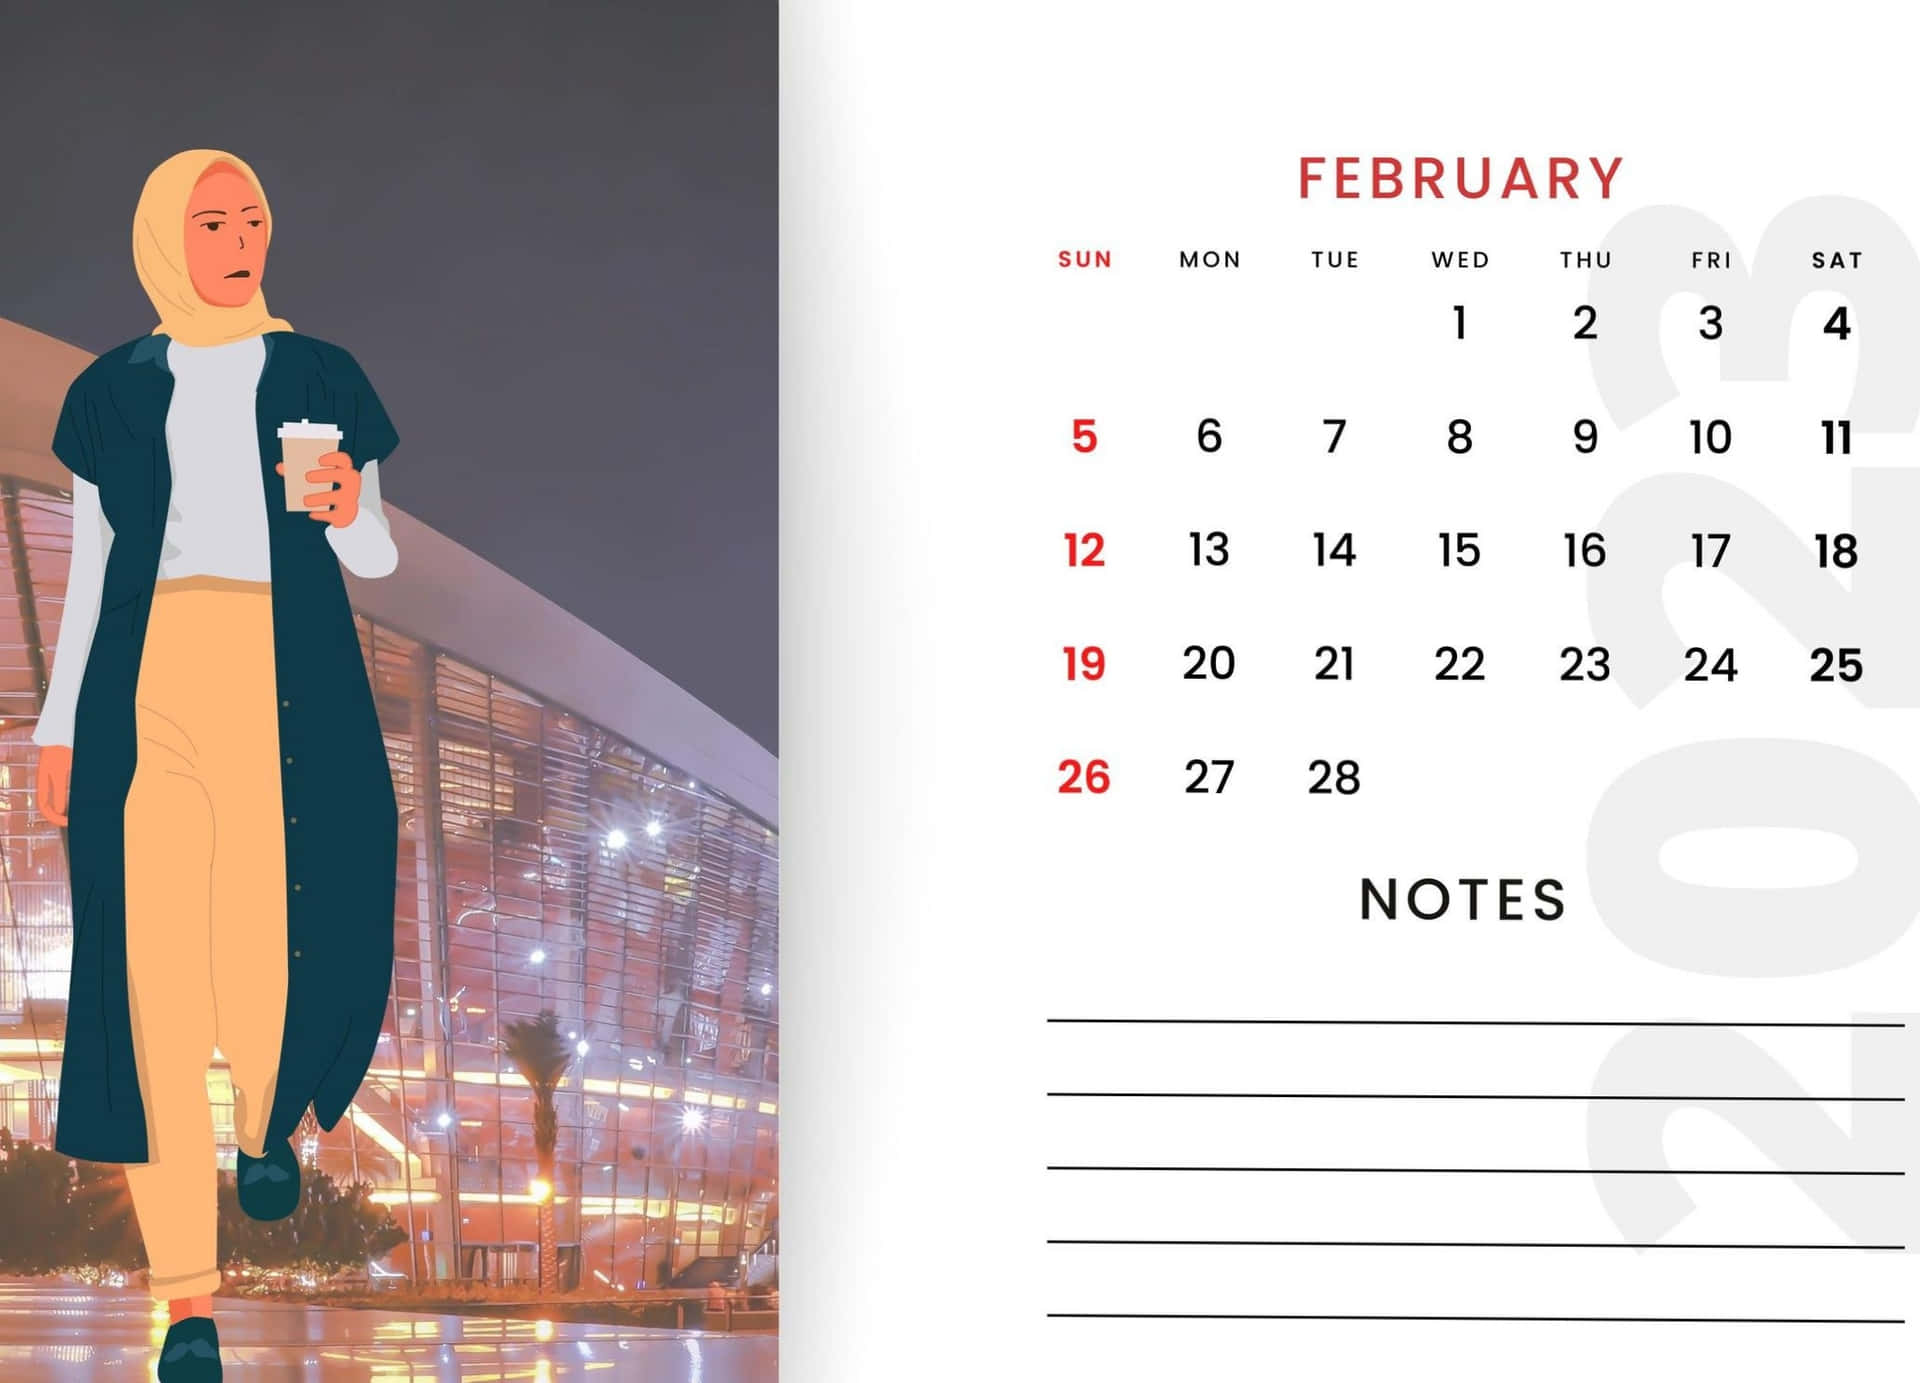 Set your goals for February with this calendar Wallpaper